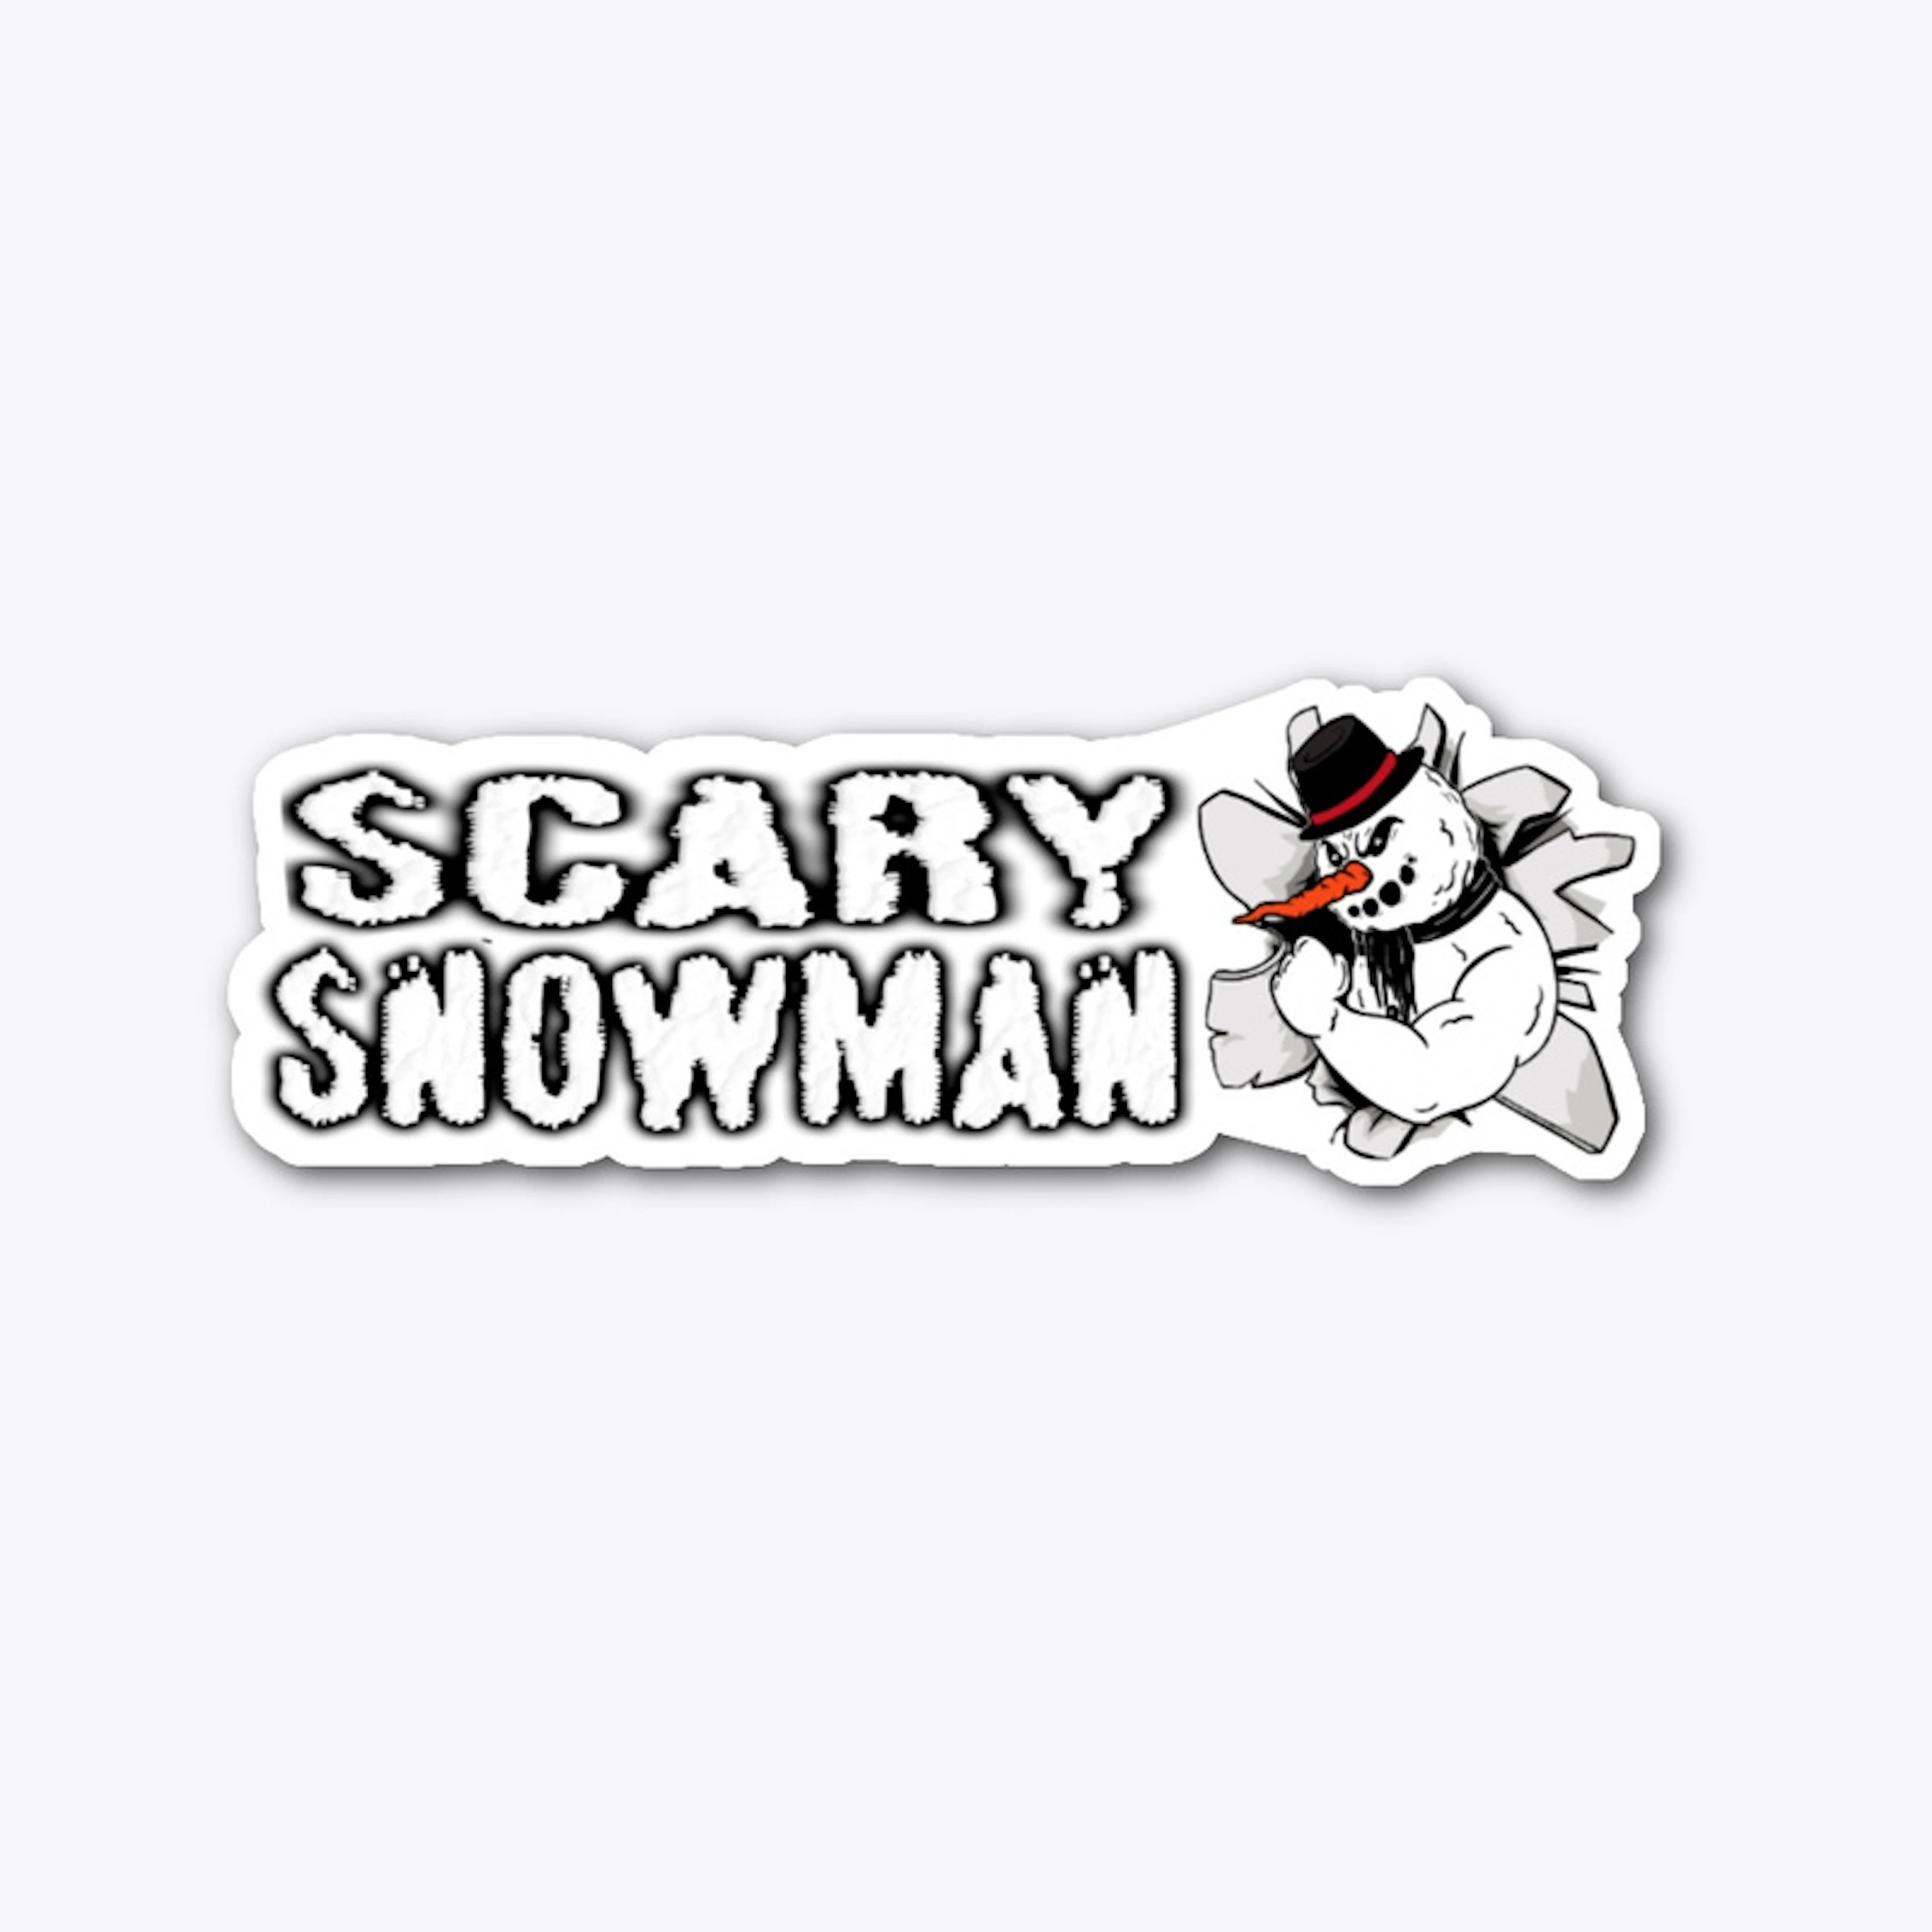 Scary Snowman Official Sticker